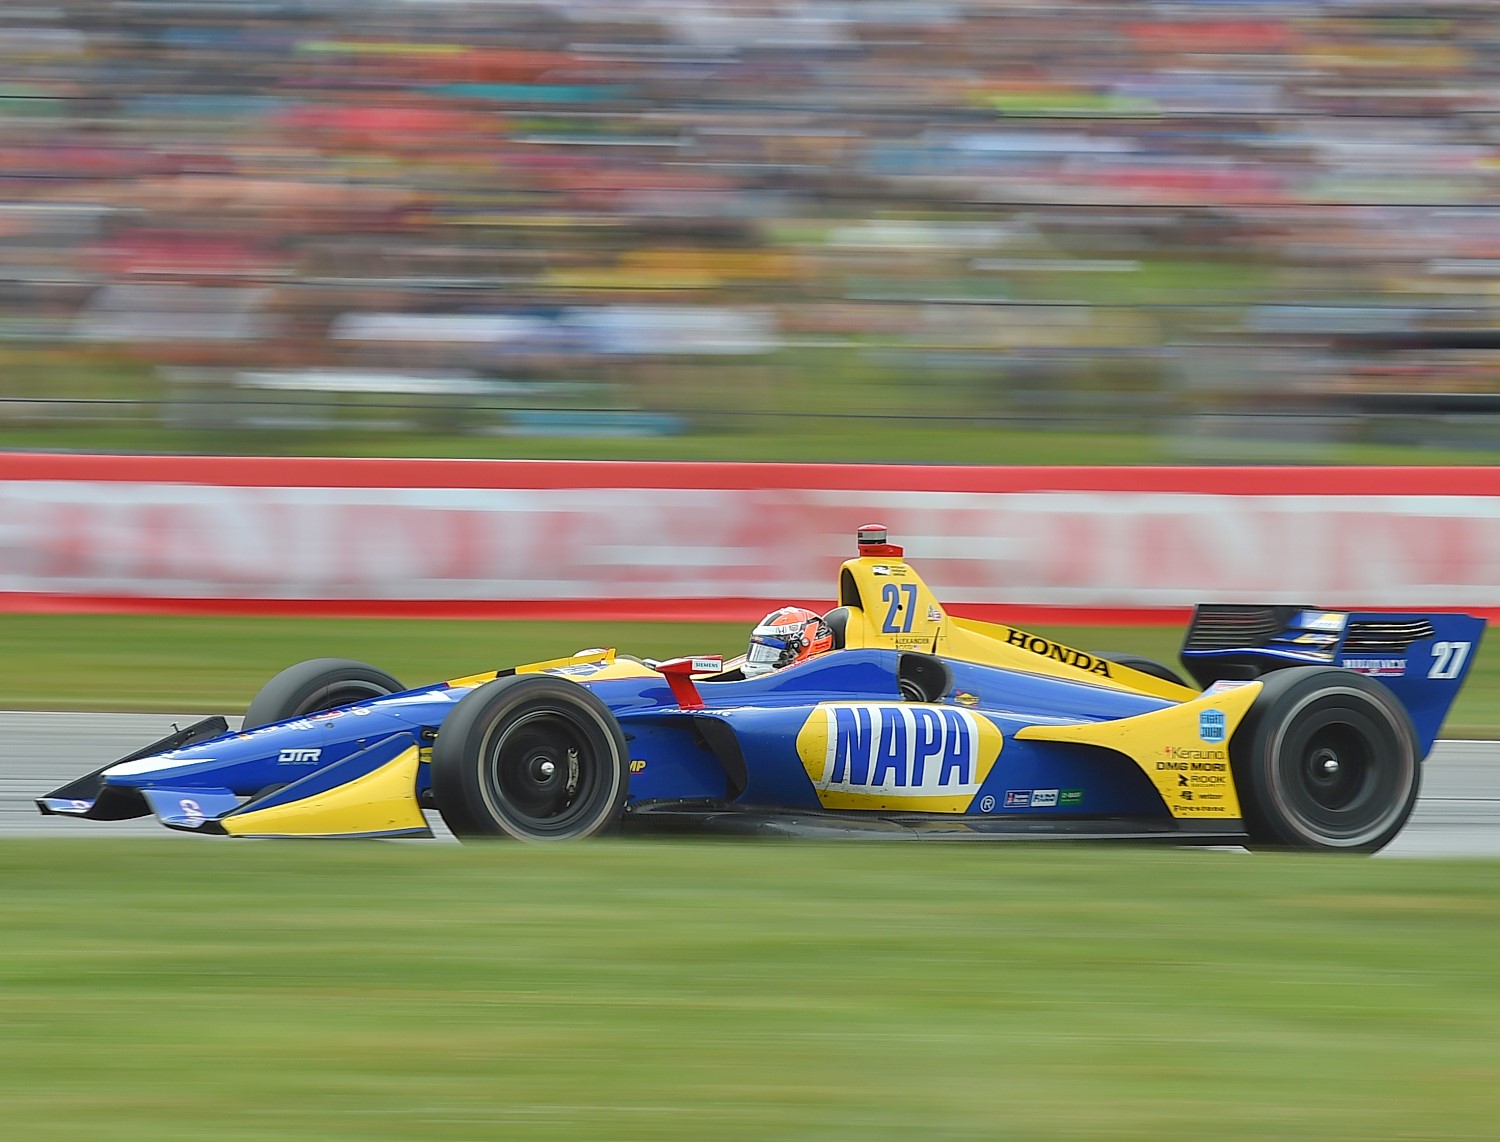 Alexander Rossi drew more people to watch this year than last